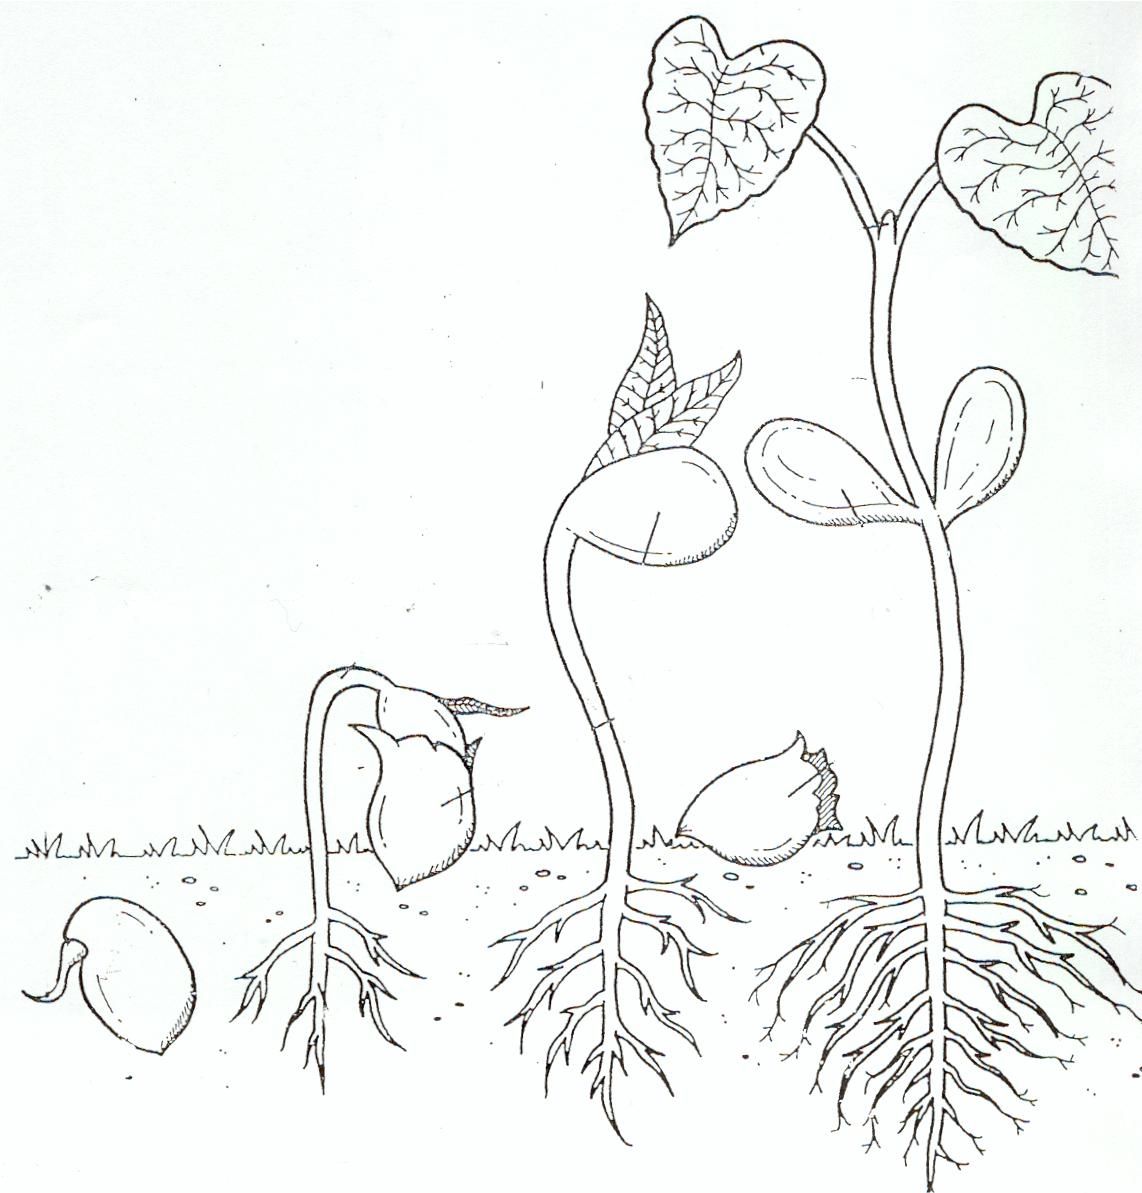 Life Cycle Coloring Page of a Seed to Plant A | Life cycles, Flower life  cycle, Coloring pages